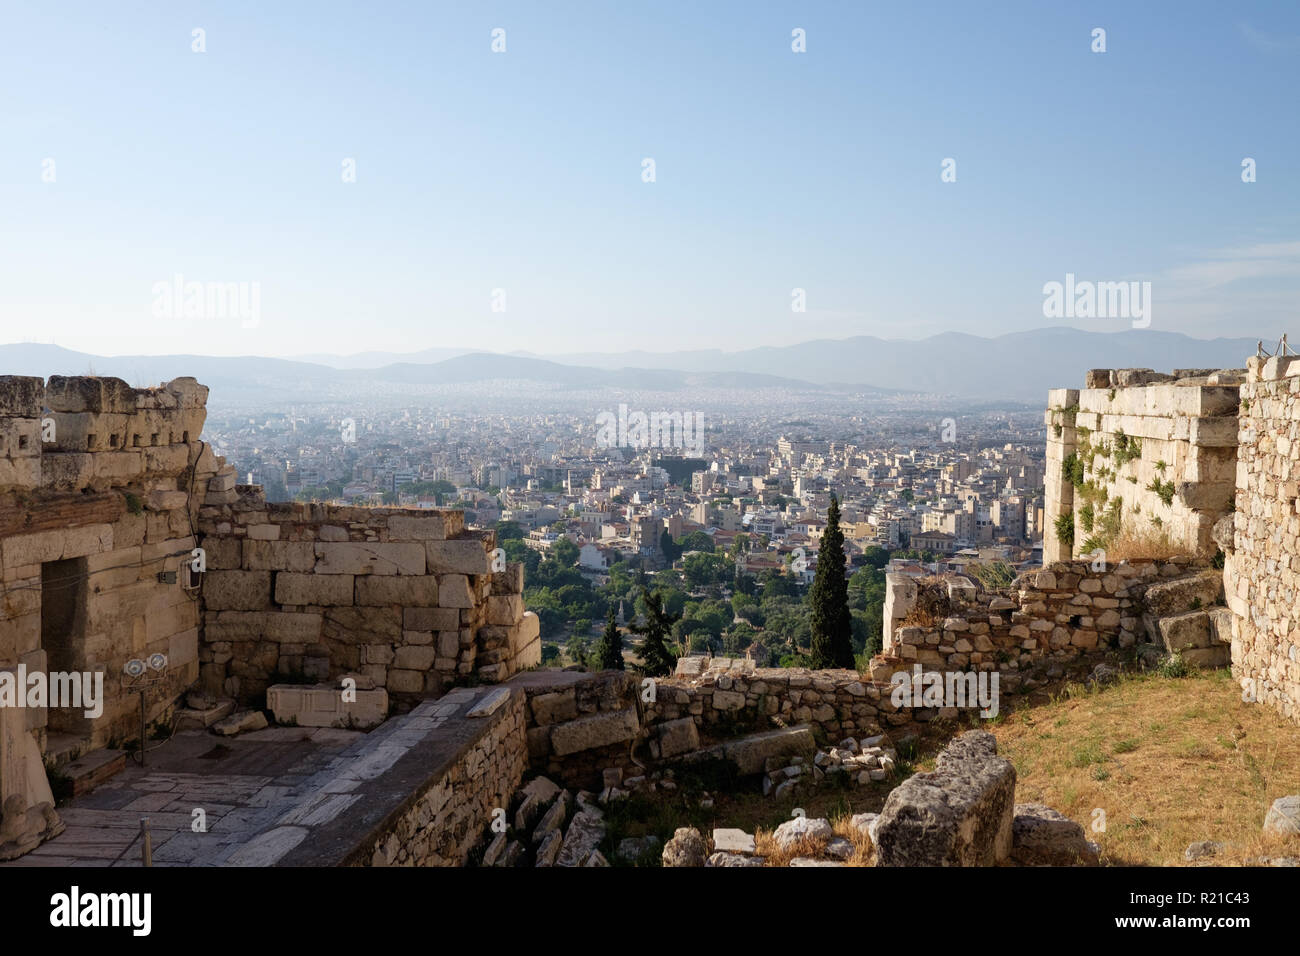 View from the Acropolis in Athens, Greece with mountains in the distance. Stock Photo